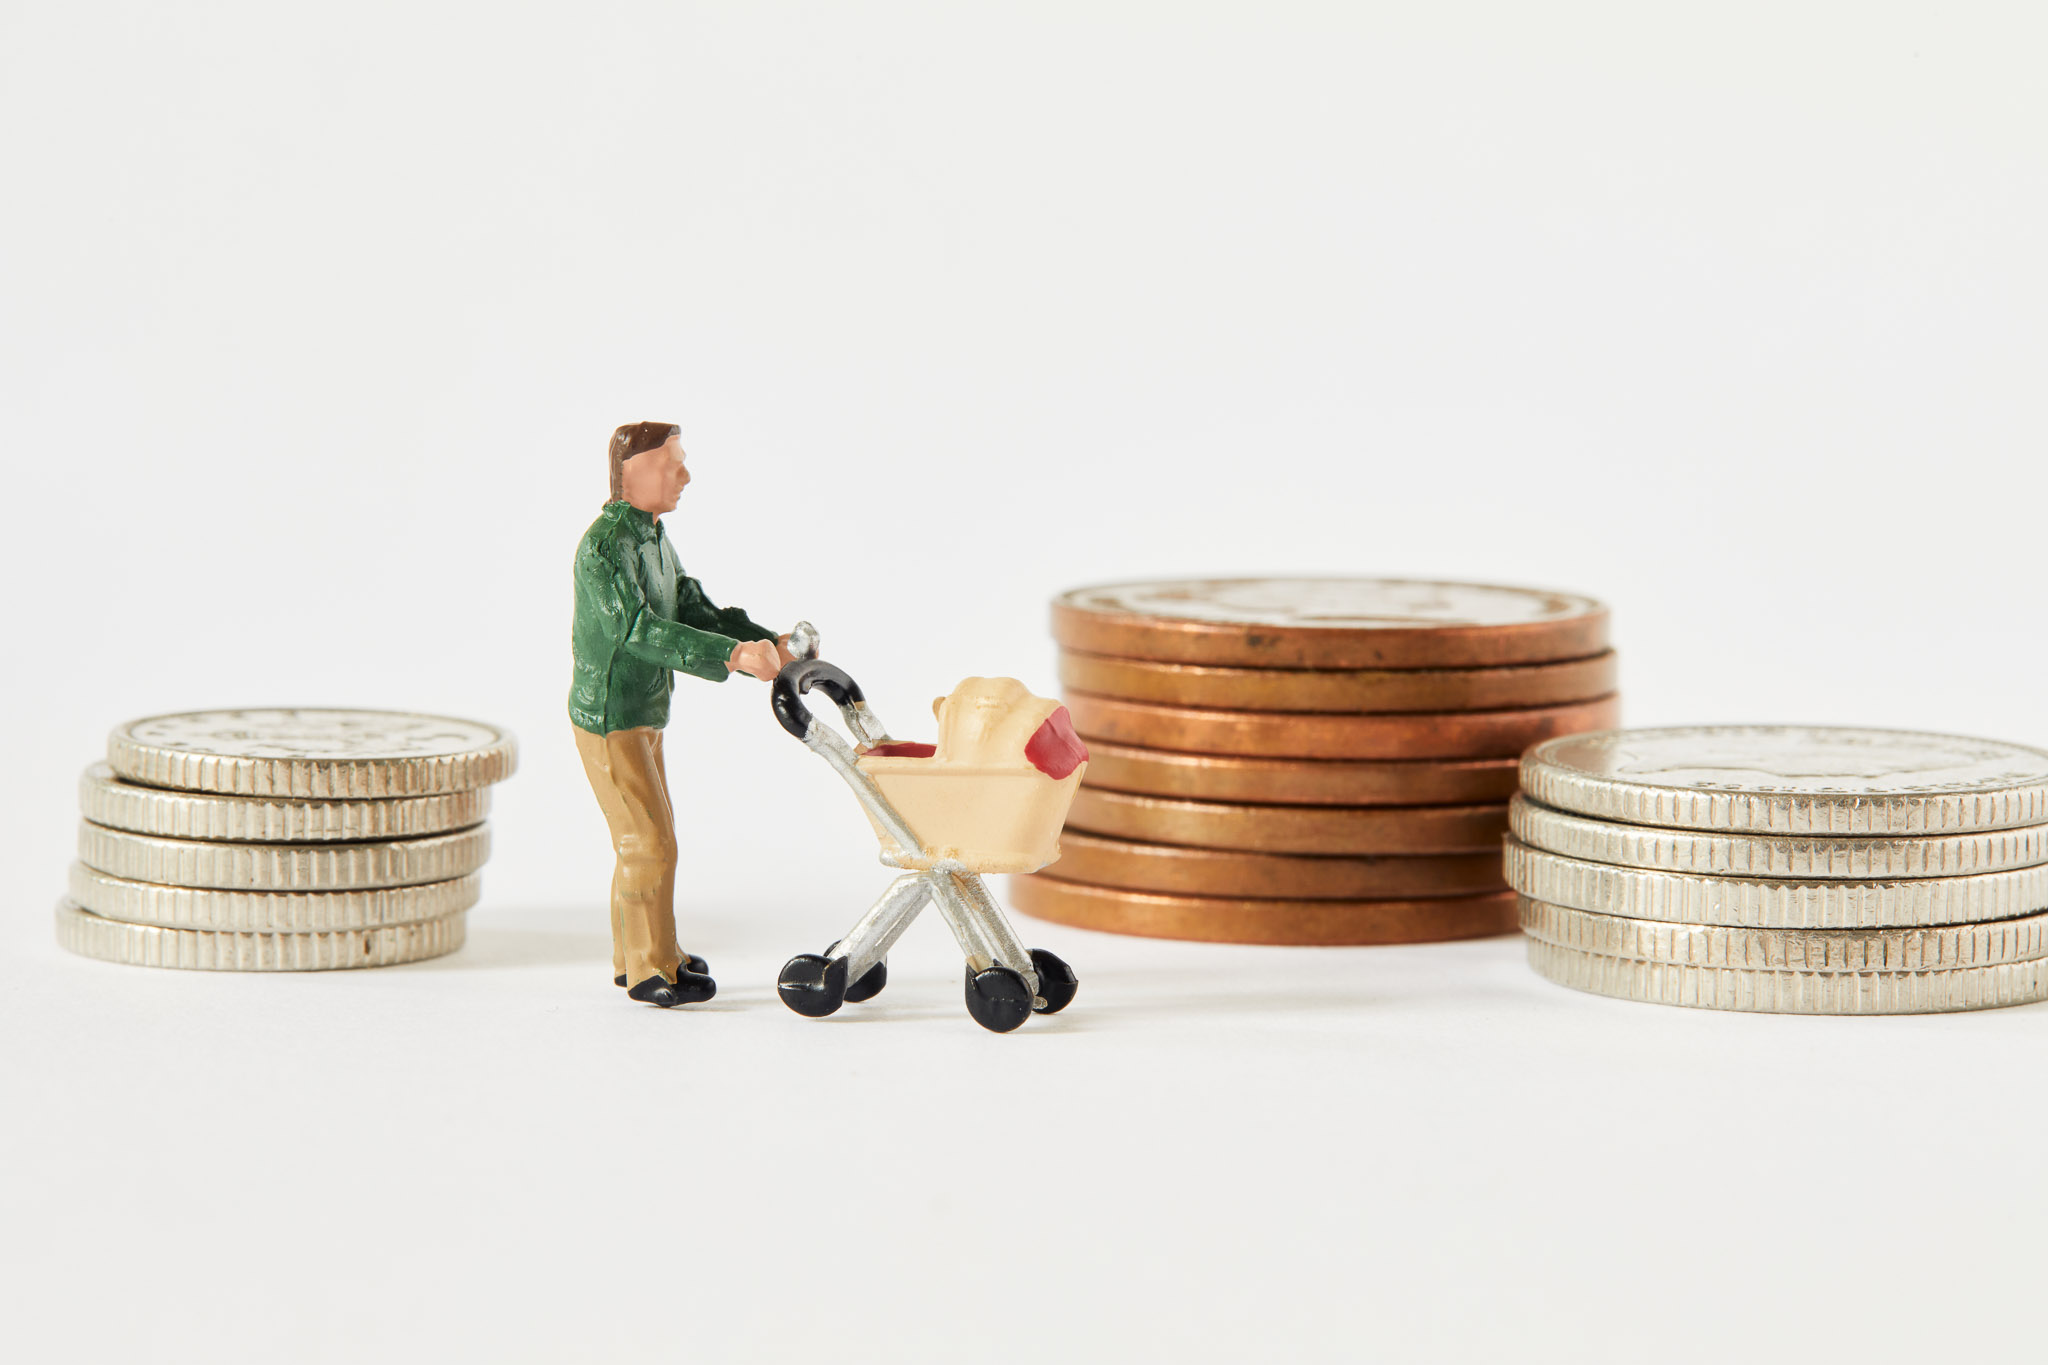 Small figurine of a parent pushing a buggy surrounded by piles of coins